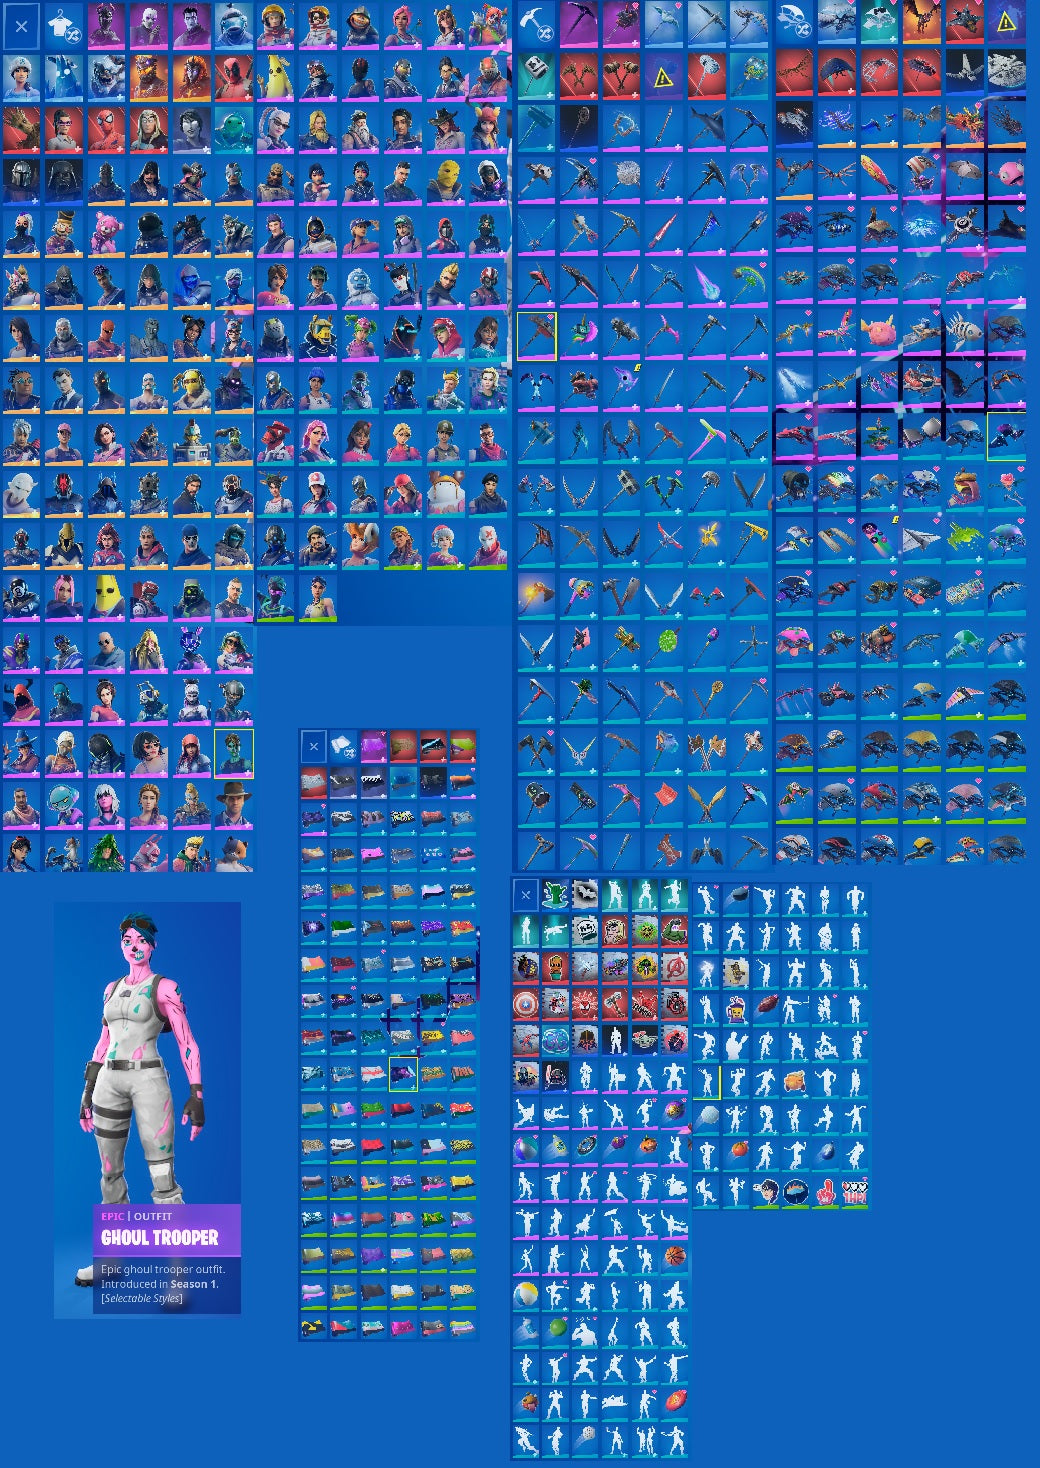 OG Pink Ghoul Trooper | 168 Outfits | All Console Linkable | Black Knight | Raider's Revenge